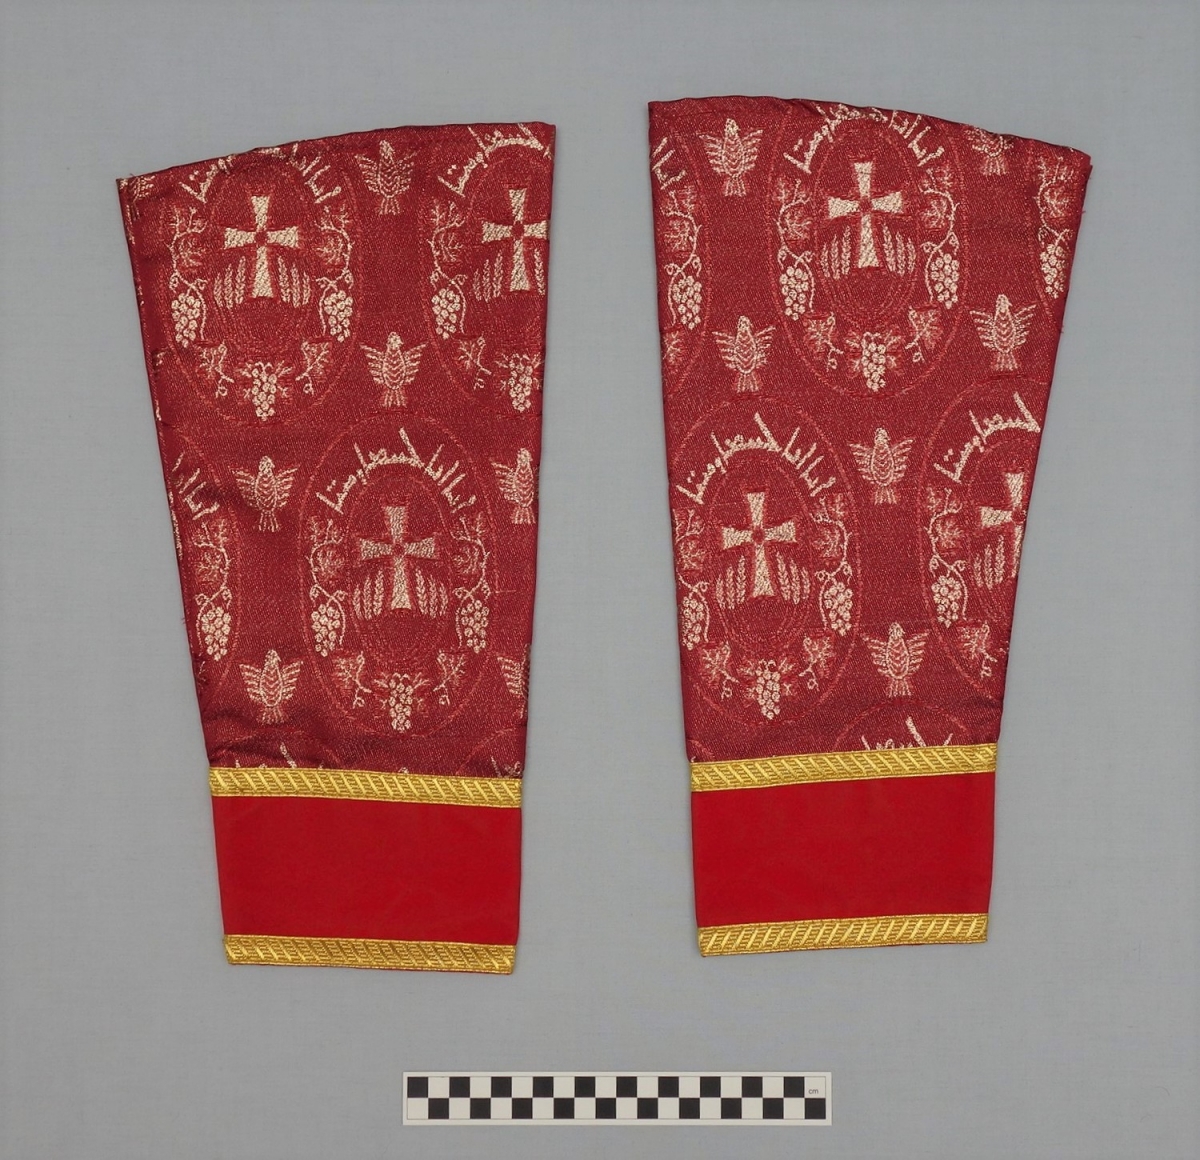 Pair of priestly sleeves worn during the mass (Turkey, early 21st century).